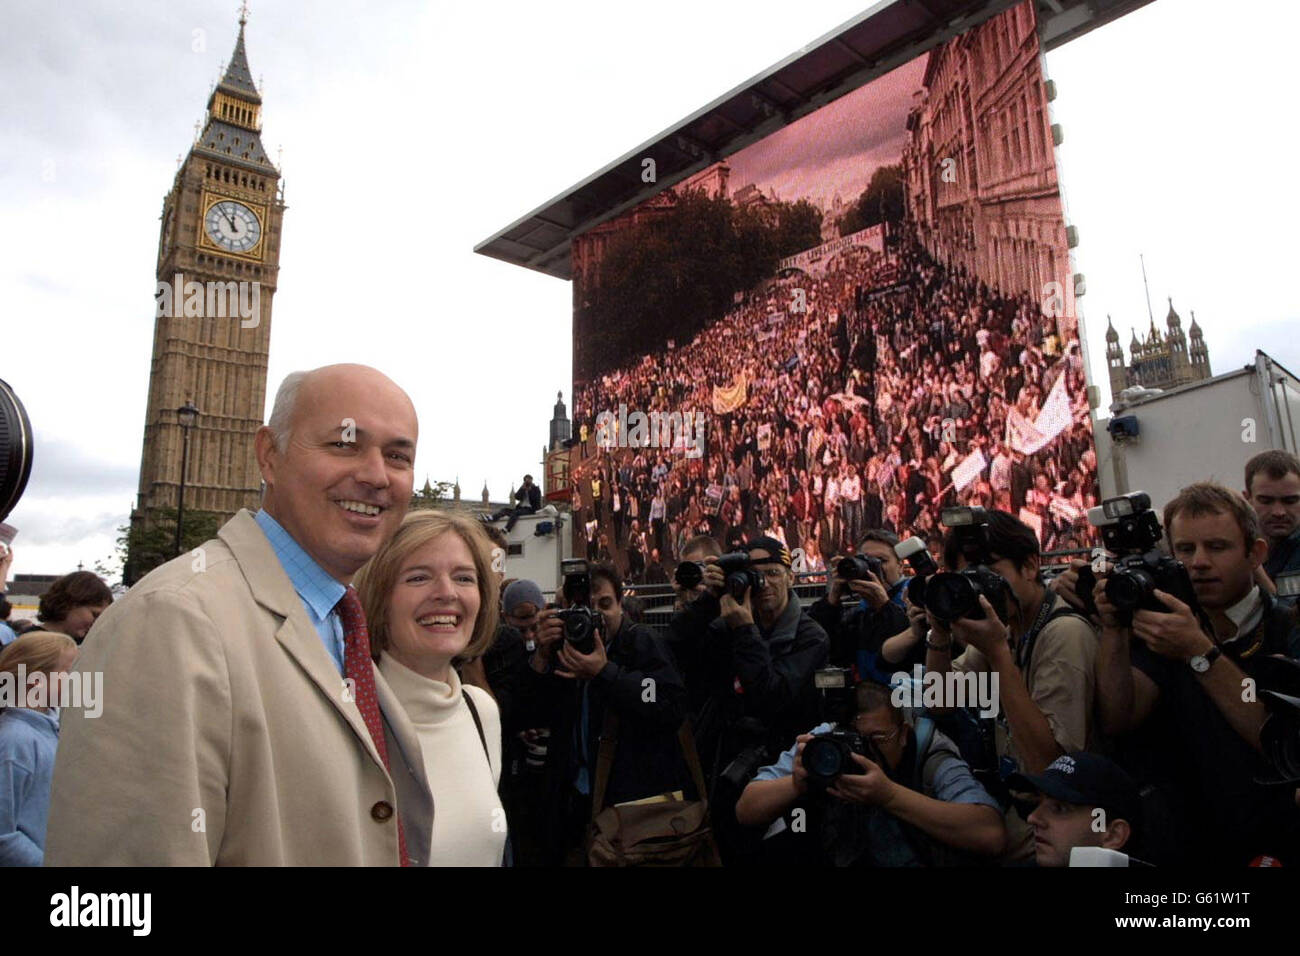 Conservative leader, Iain Duncan Smith and his wife Betsy at the Liberty and Livelihood march, organised by the Countryside Alliance, as passes through central London to show its opposition to the proposed ban on fox-hunting and hunting with hounds. *As many as 300,000 people are expected to descend on London to take part in the march which is heading towards Whitehall. Stock Photo